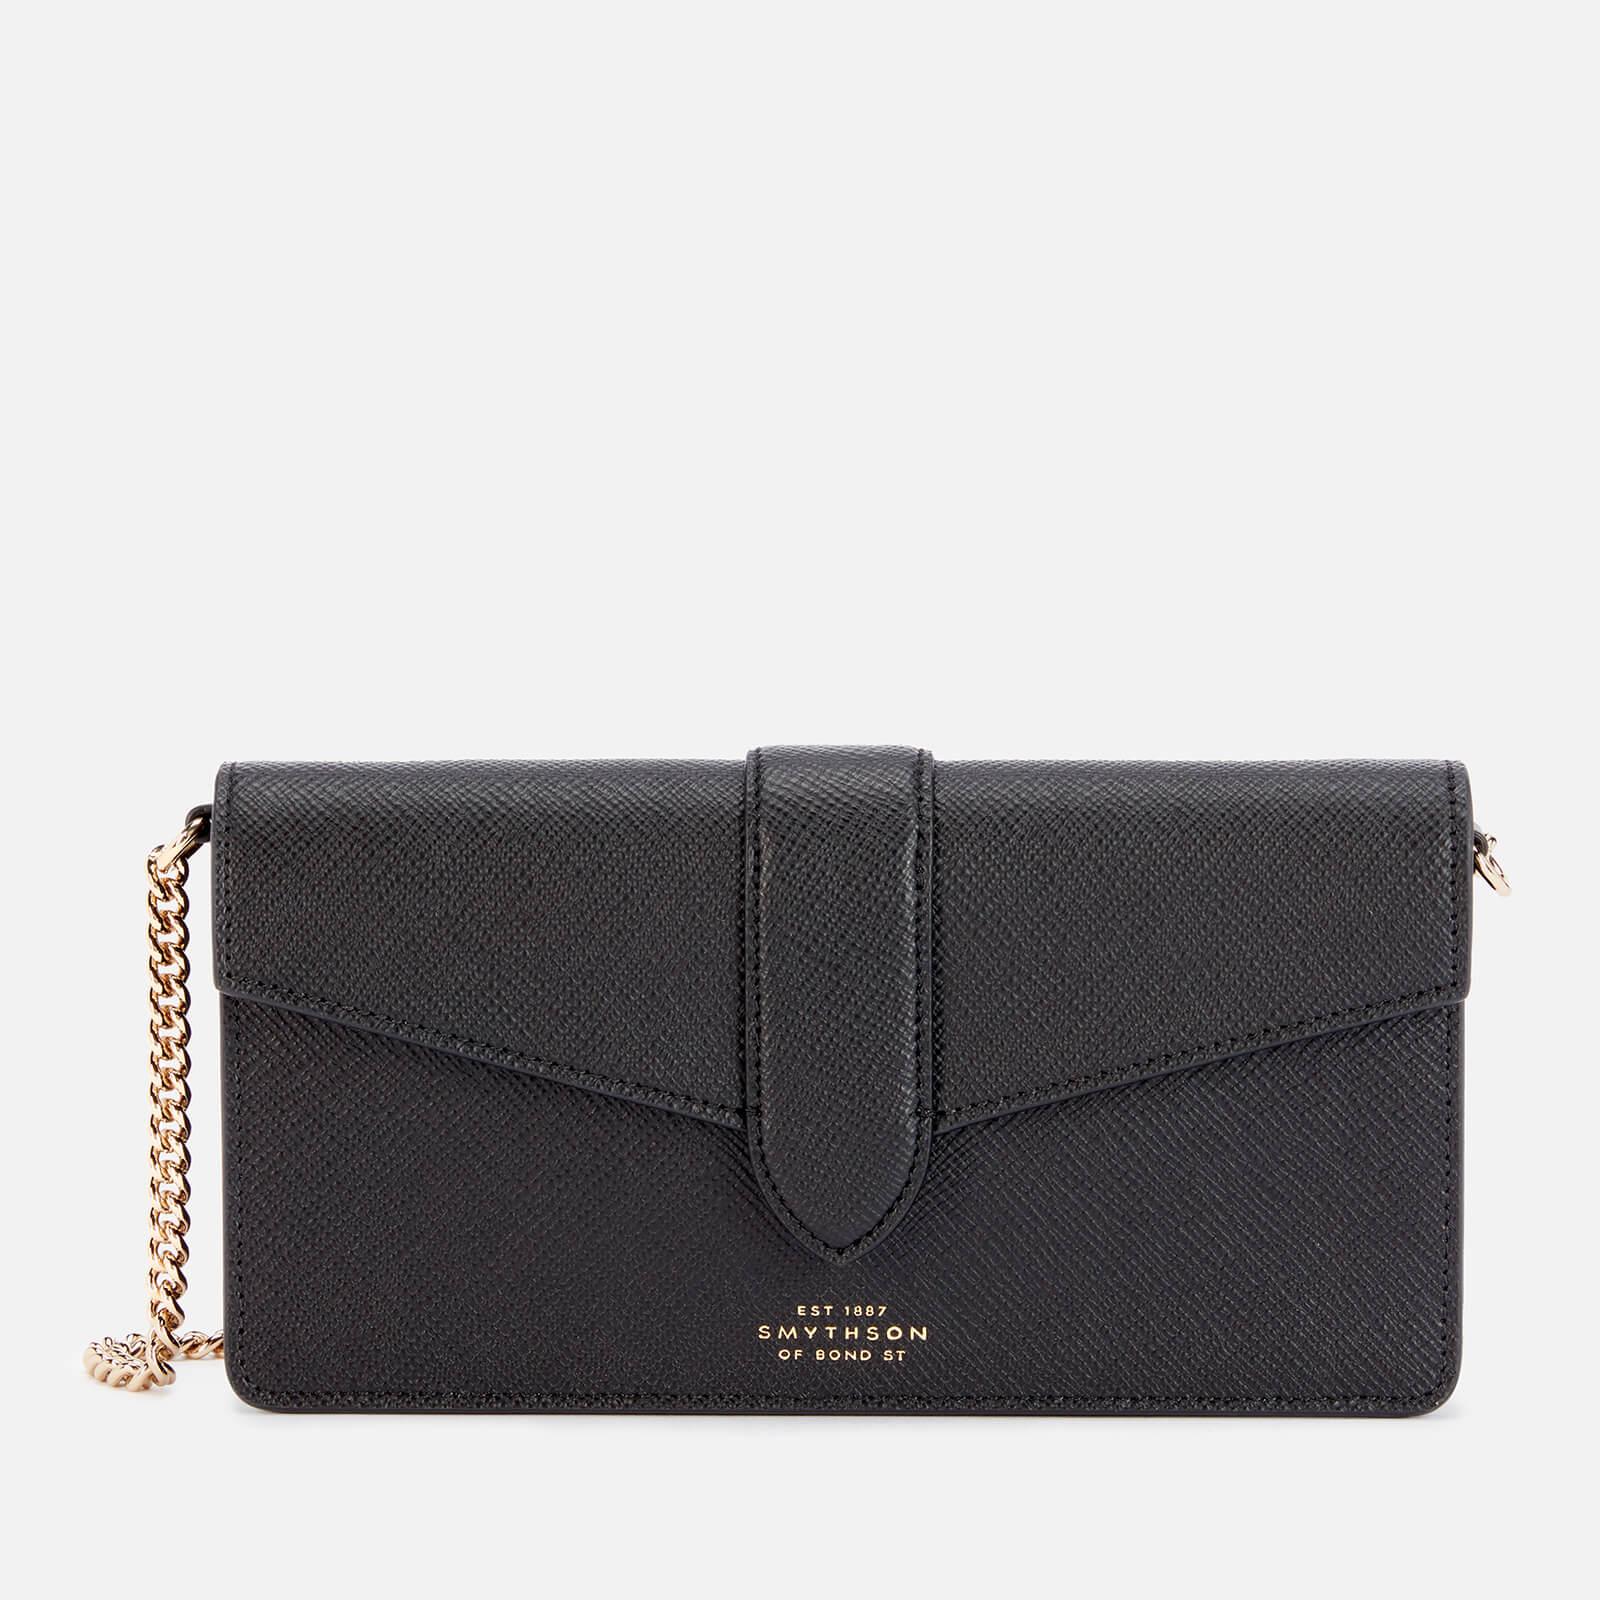 Smythson Panama Purse With Chain Strap in Black | Lyst